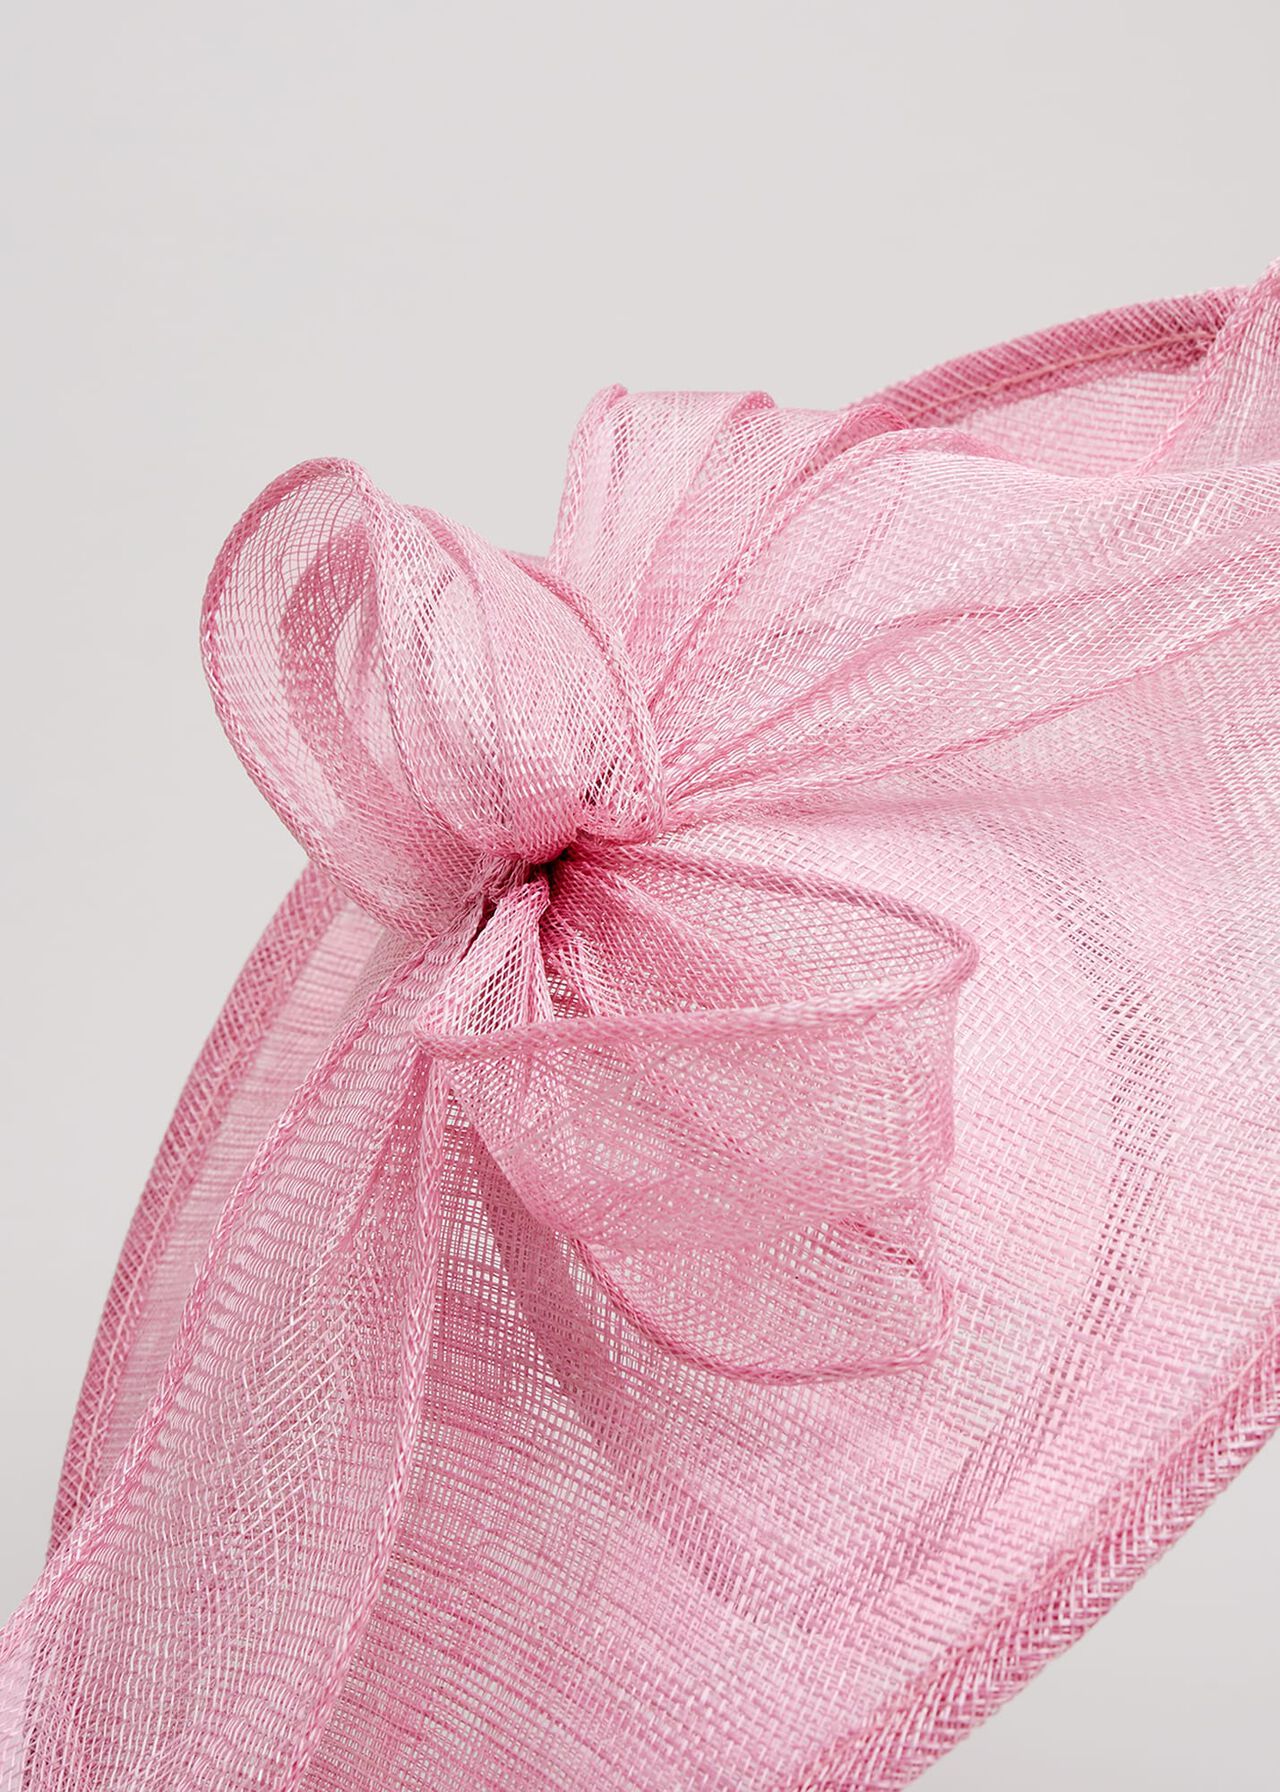 Bow Detail Oval Fascinator